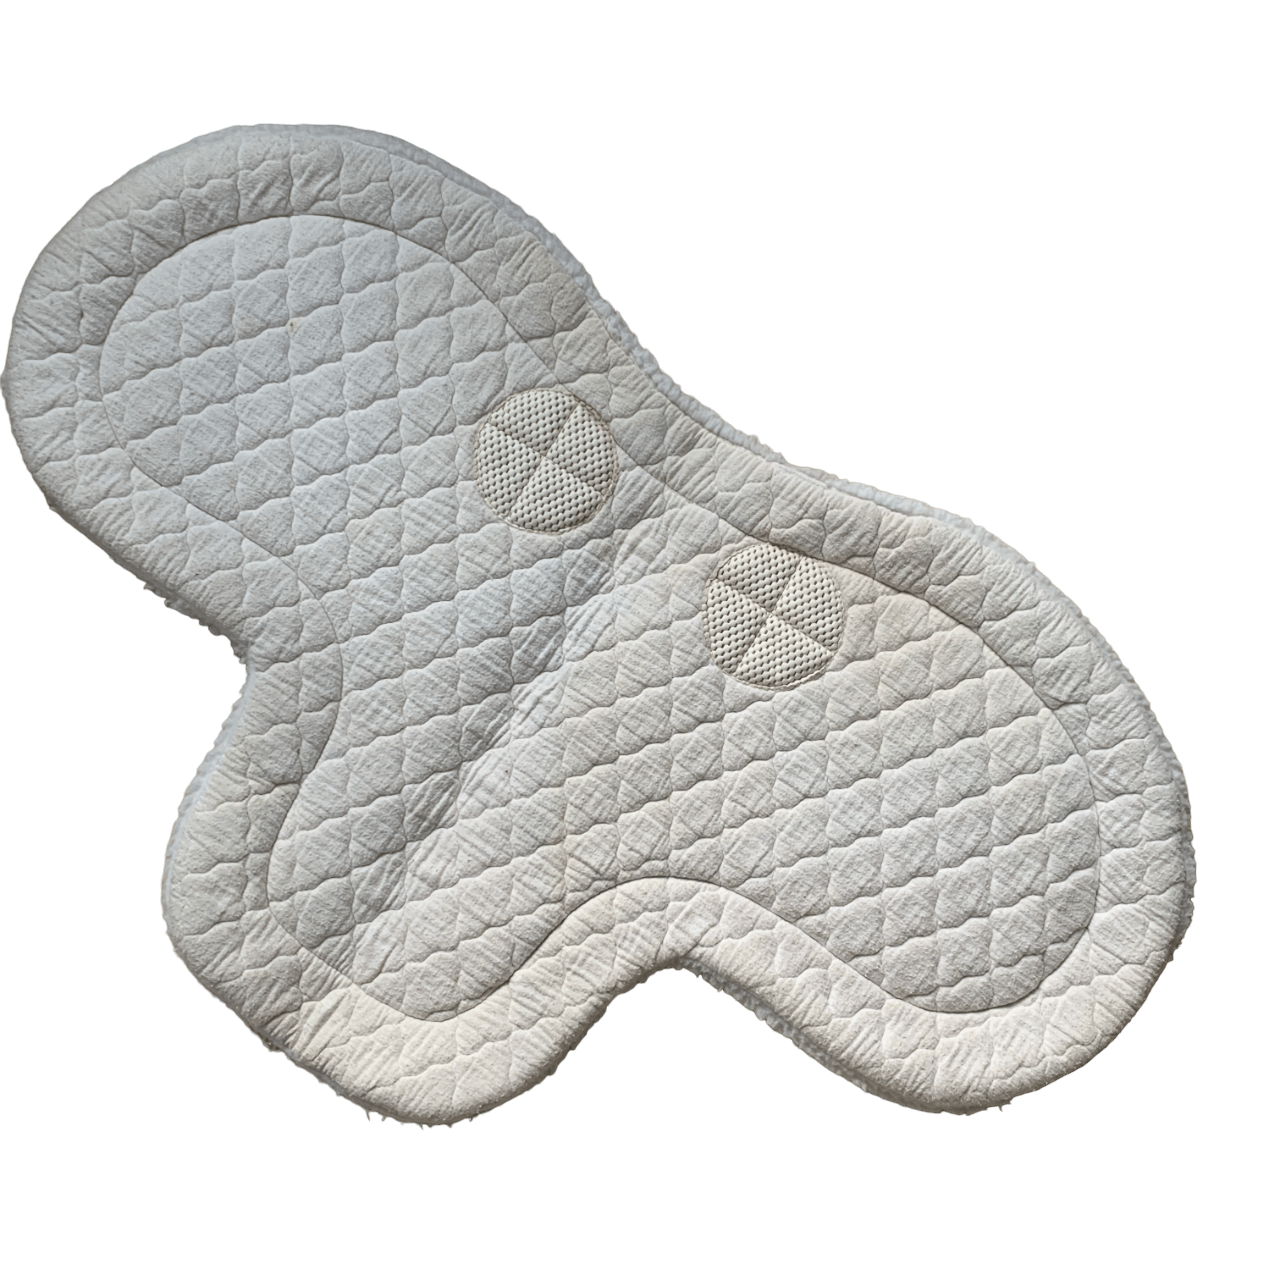 Wilker's 'Cling On' Saddle Pad